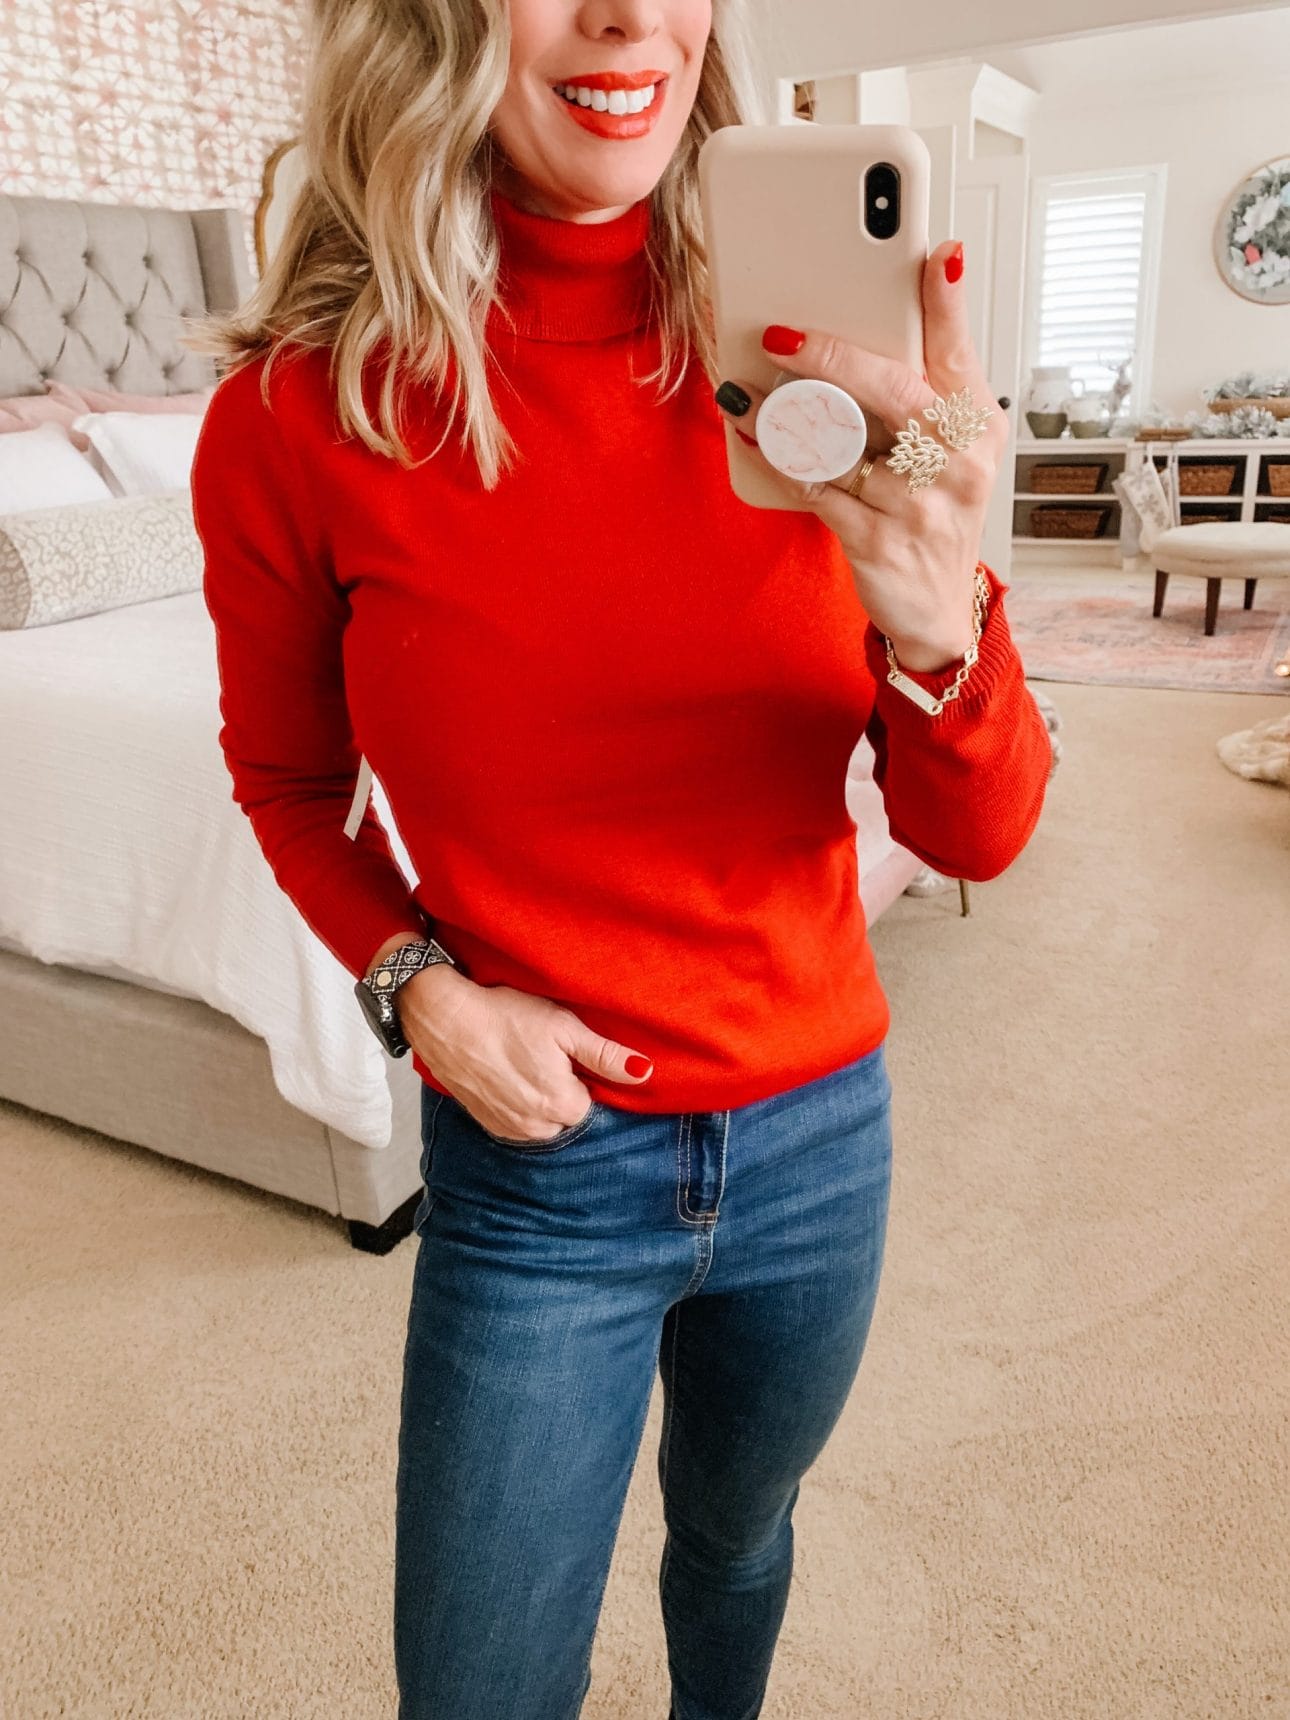 Amazon Fashion, Turtleneck Sweater in Red, Jeans, Mules 